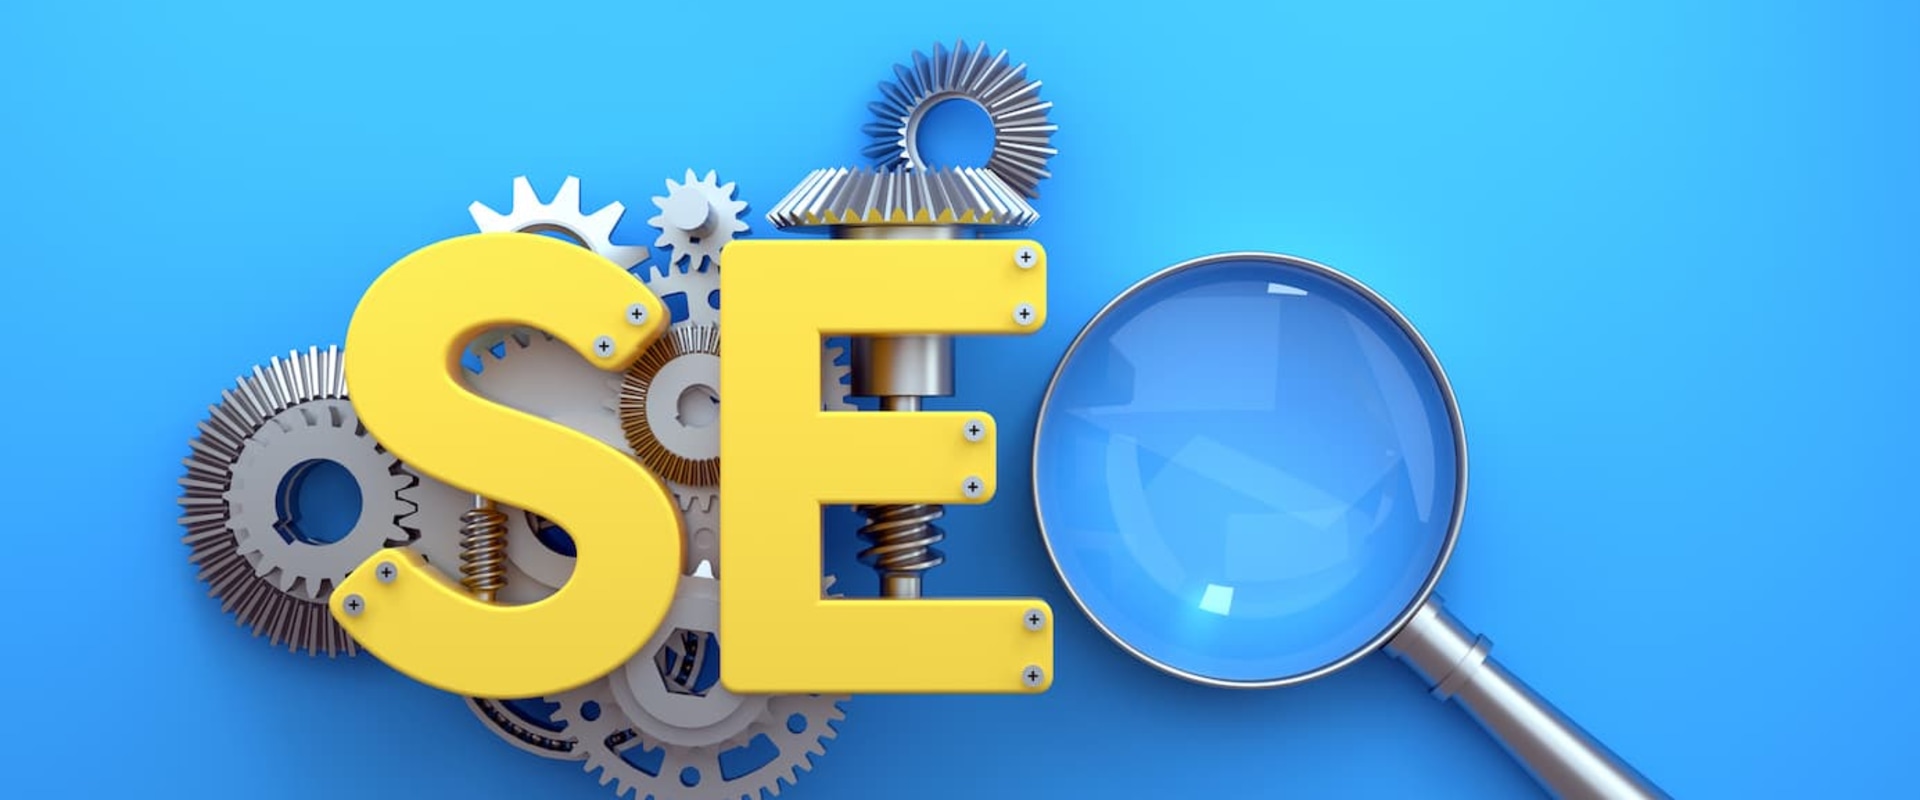 Is search engine optimization a form of digital marketing?